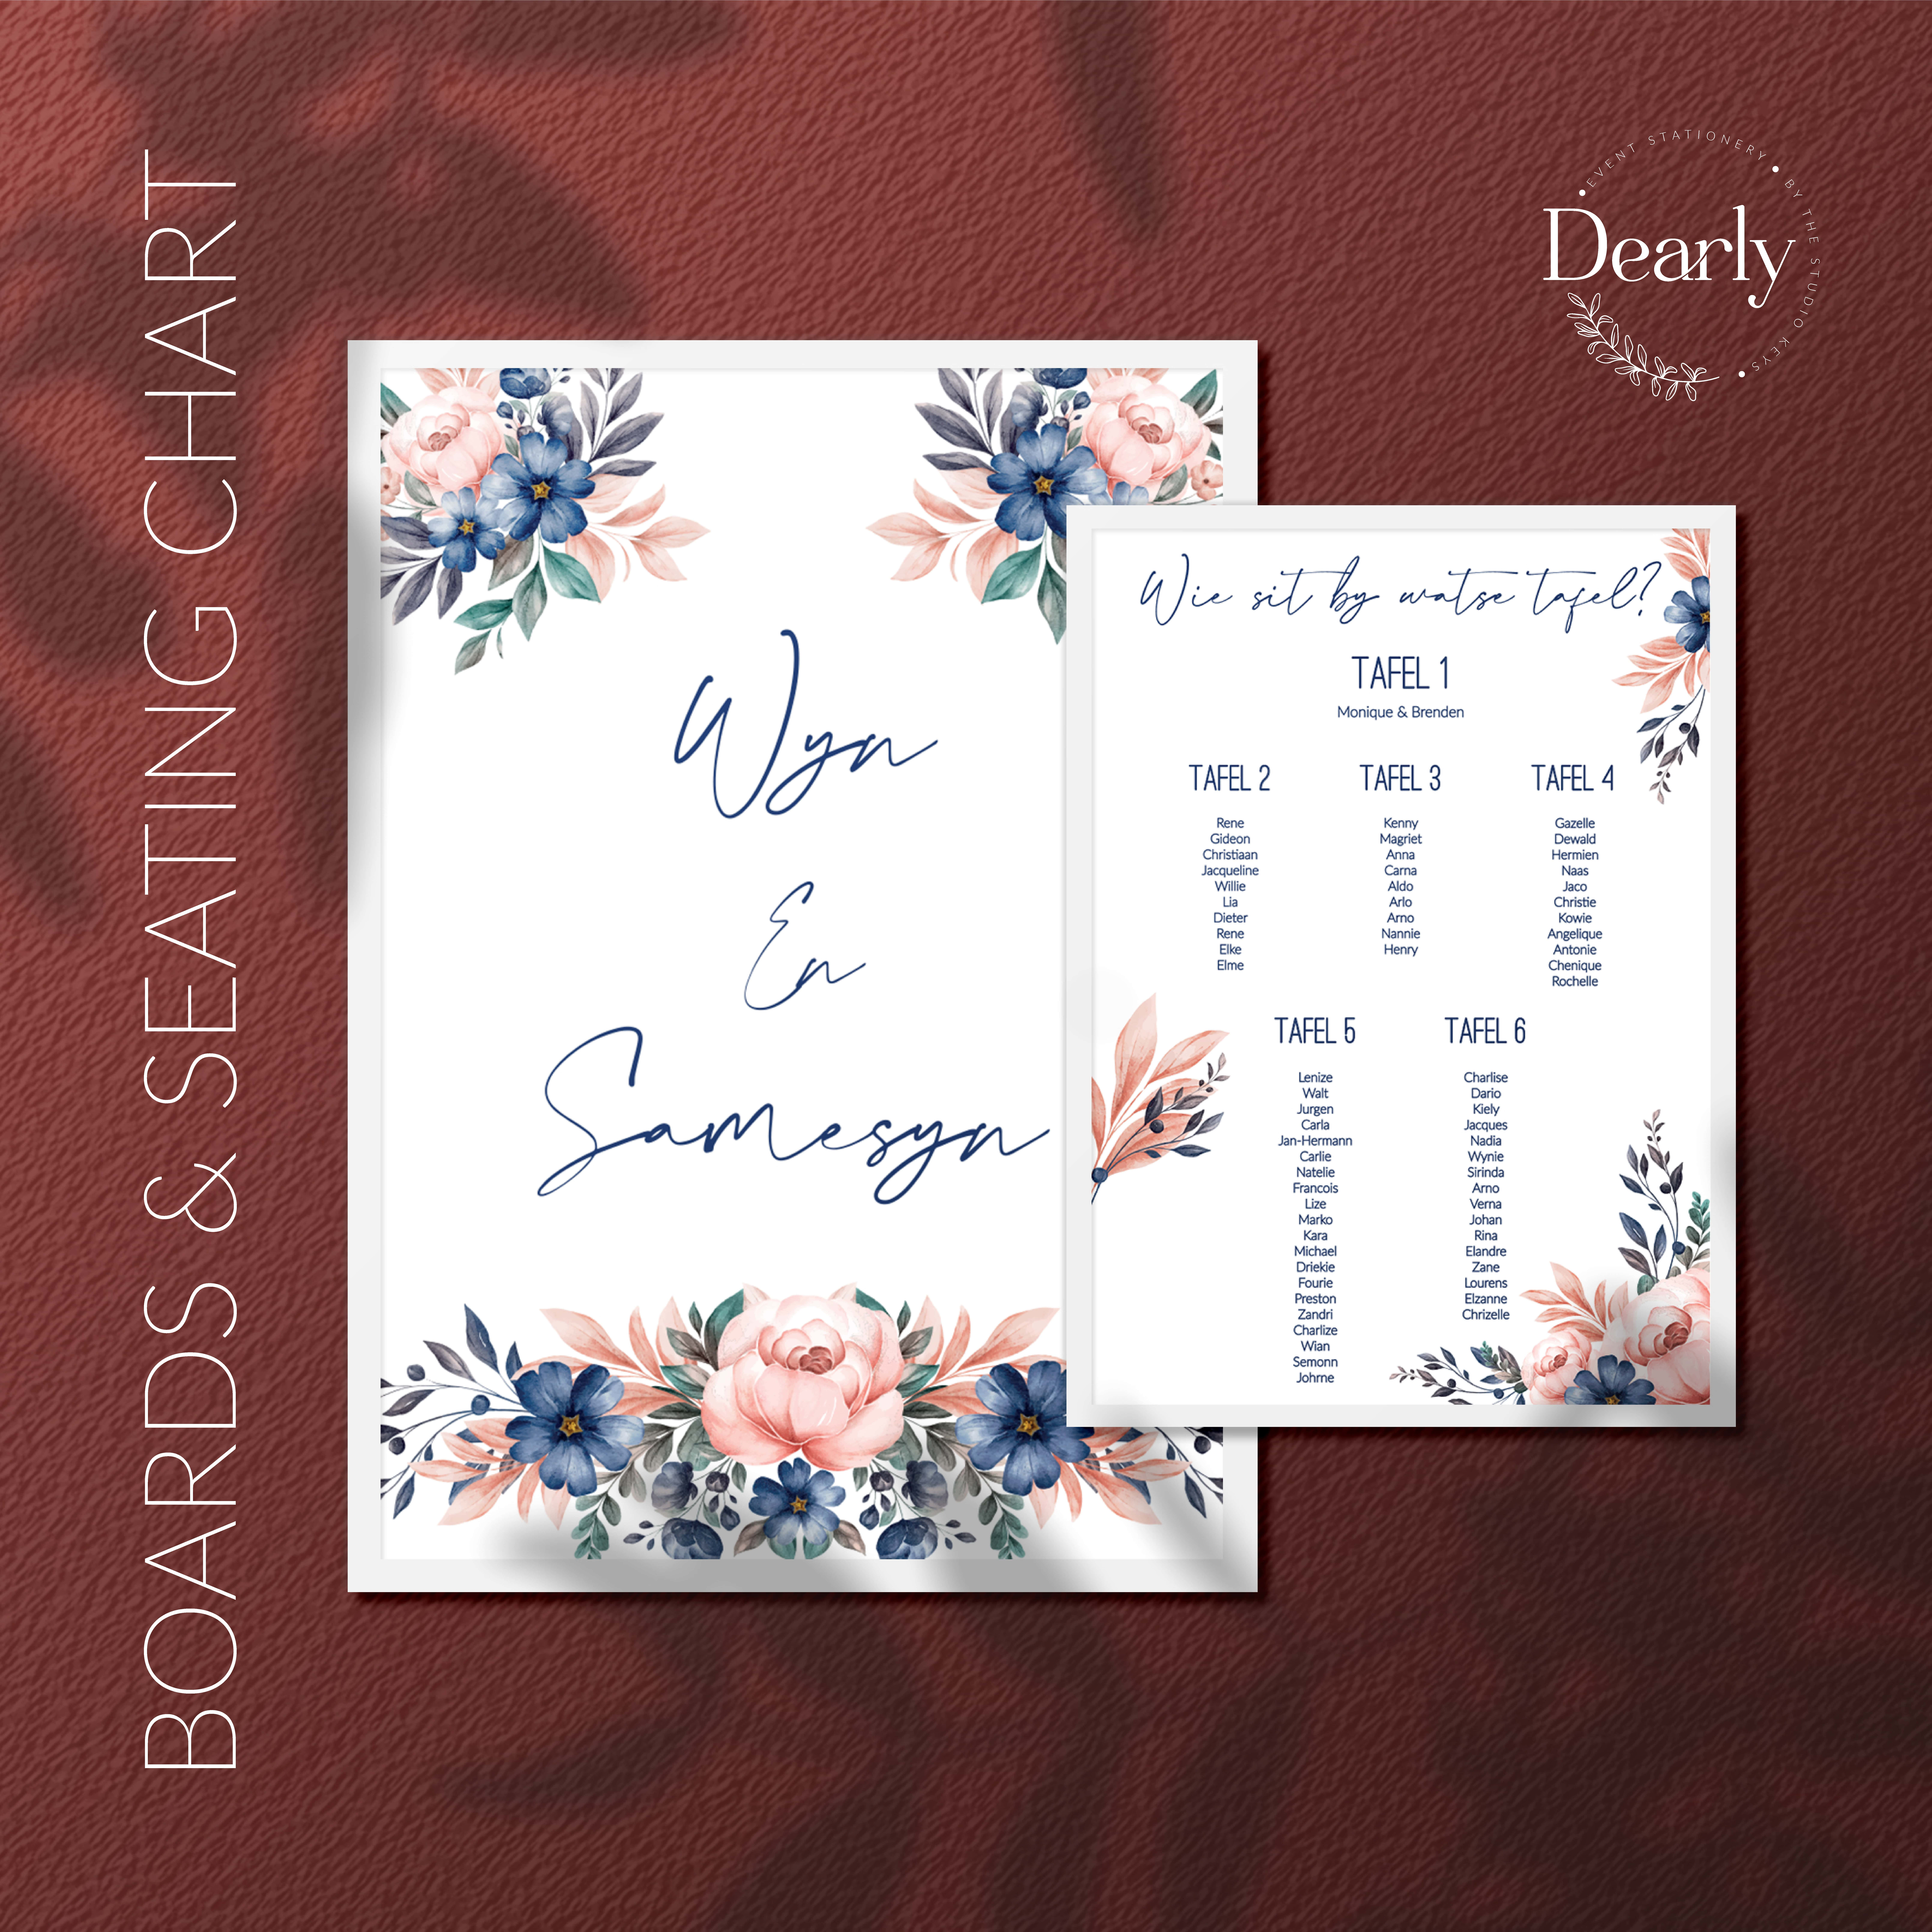 Dearly Event Stationery